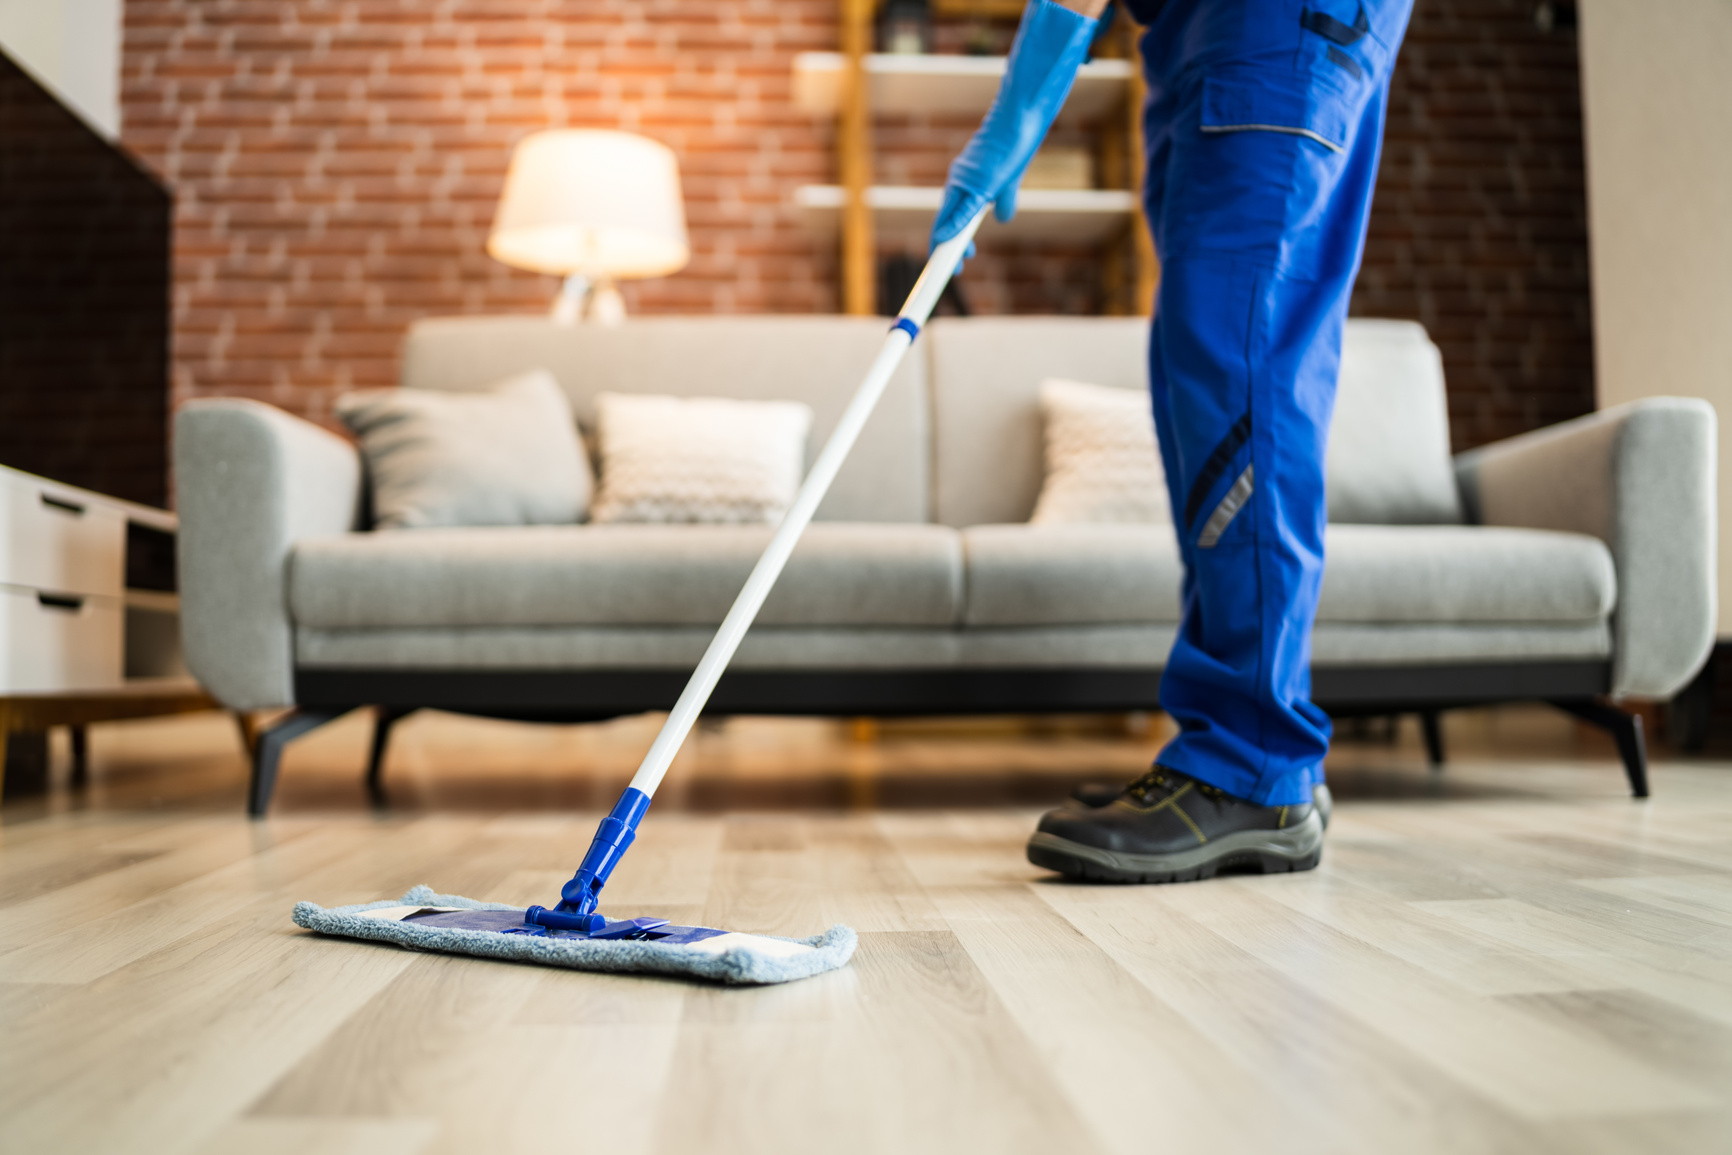 Home Floor Cleaning Service